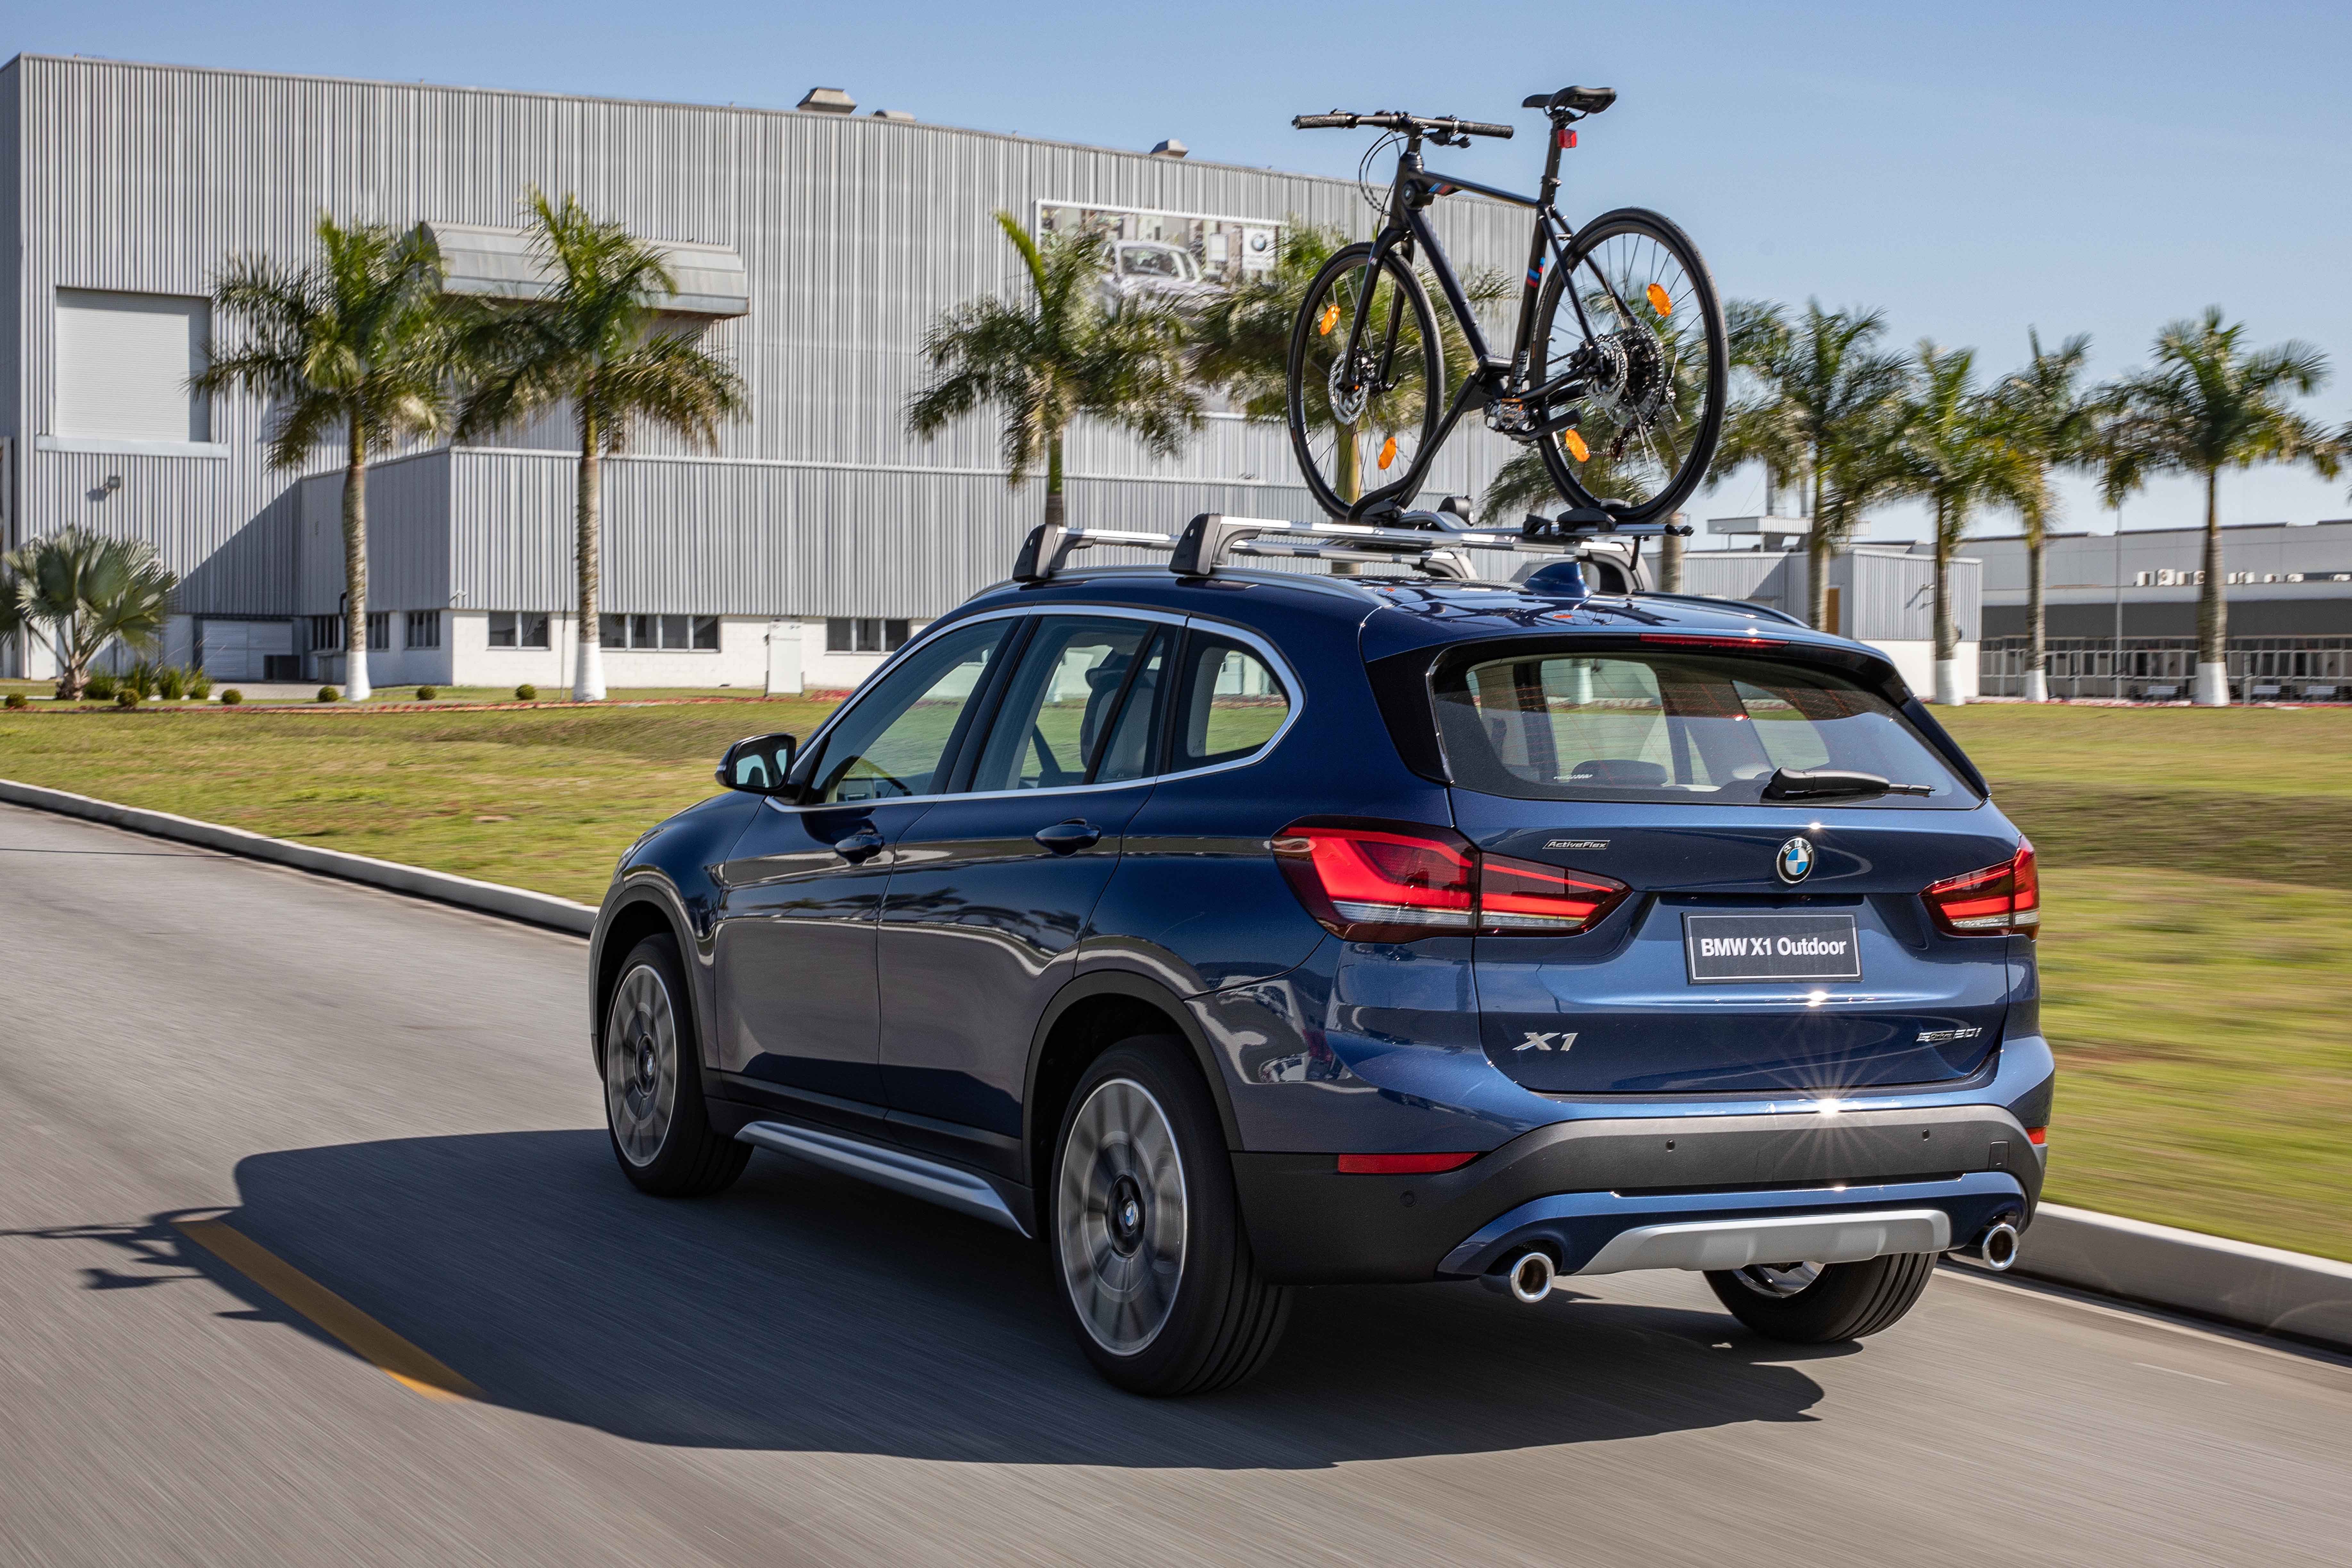 The BMW X1 Outdoor charges a bike price per roof rack